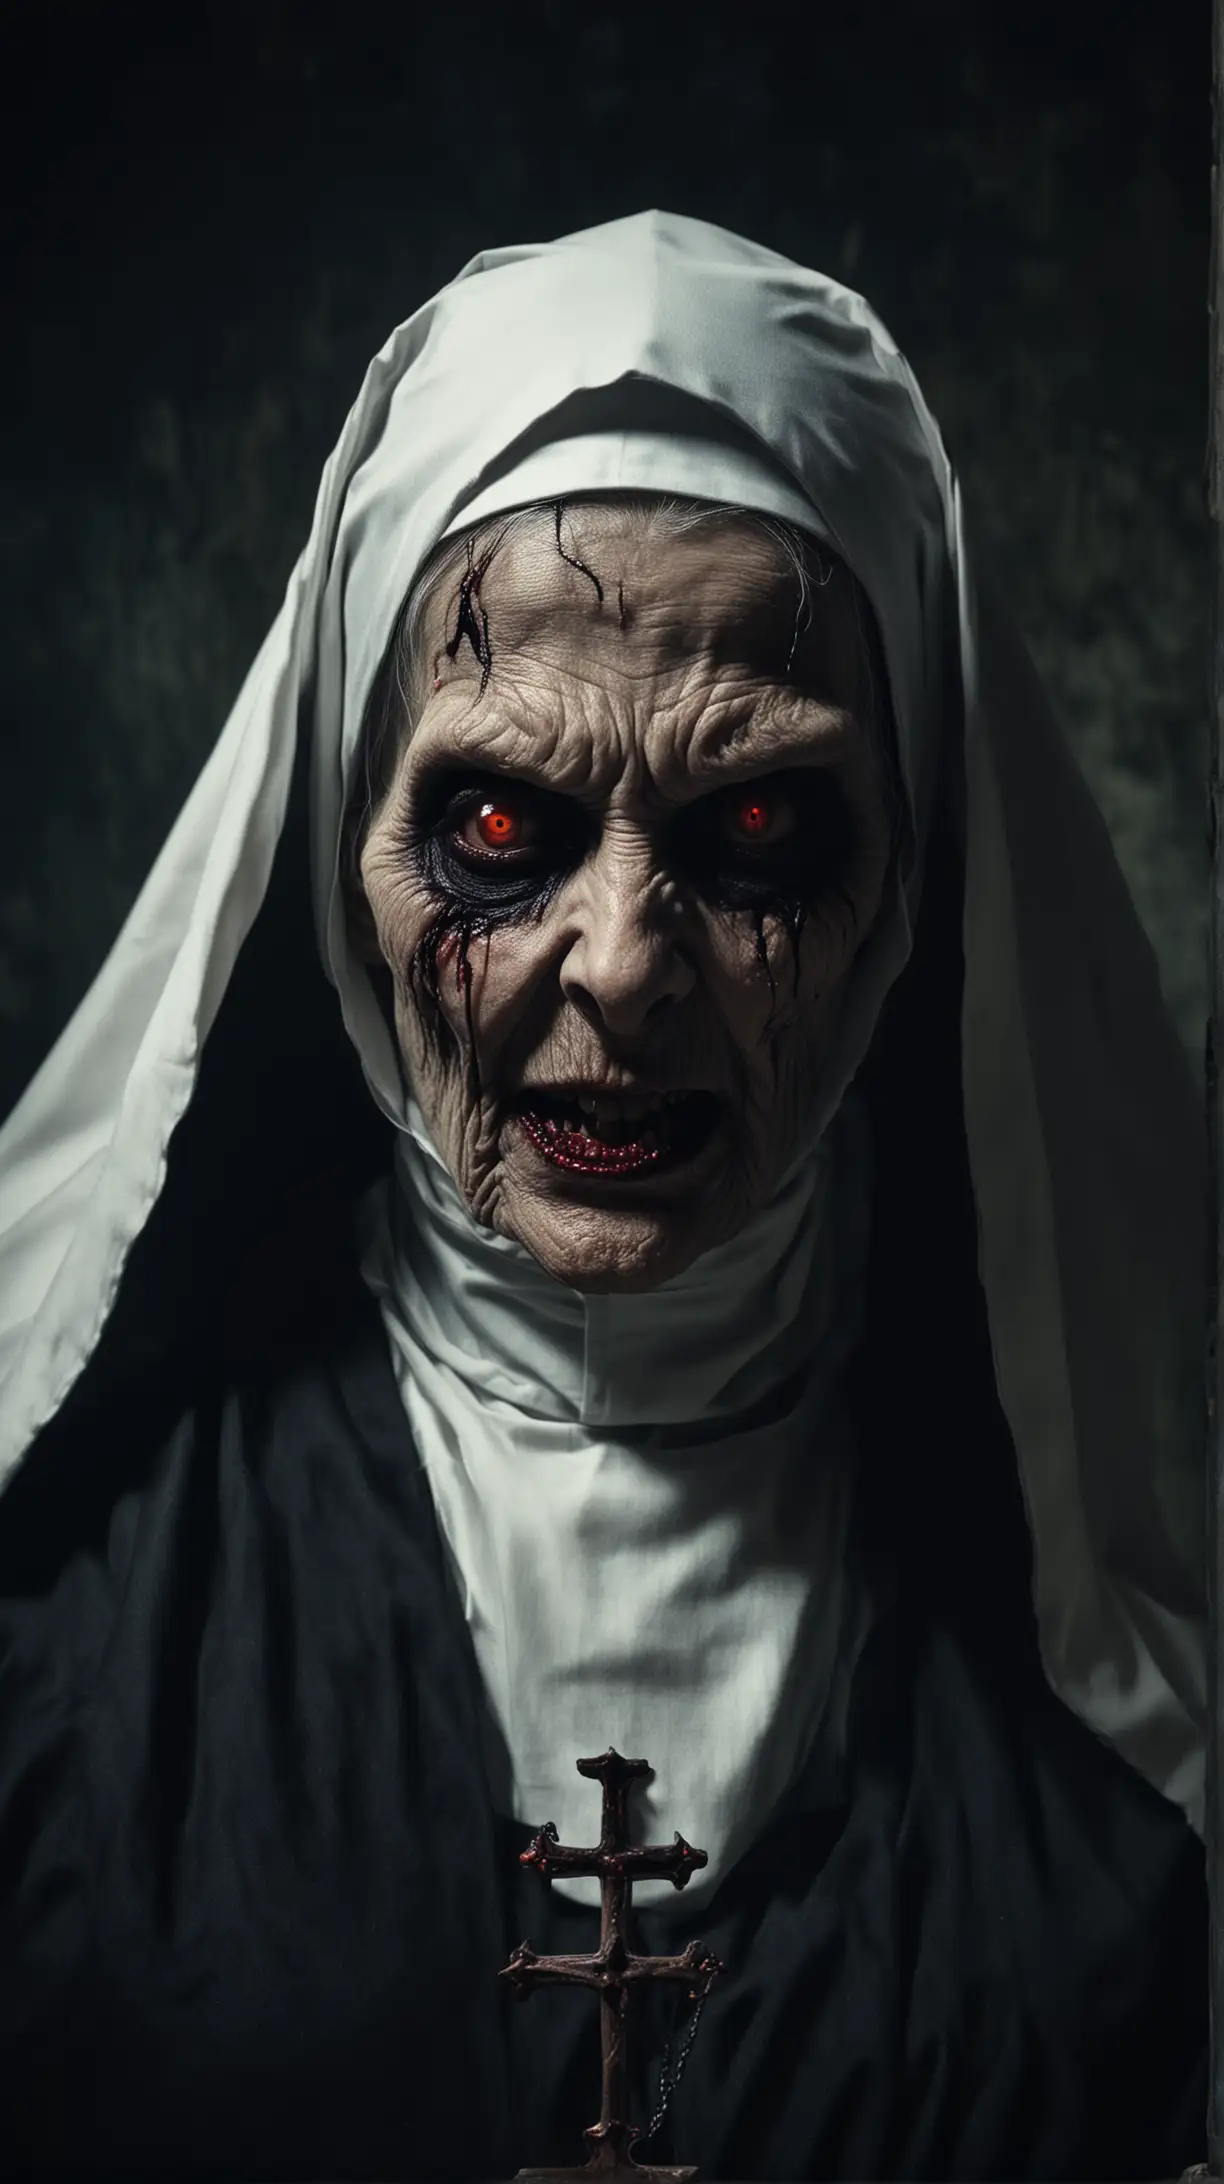 Sinister Demon Nun with Vampire and Devil Features